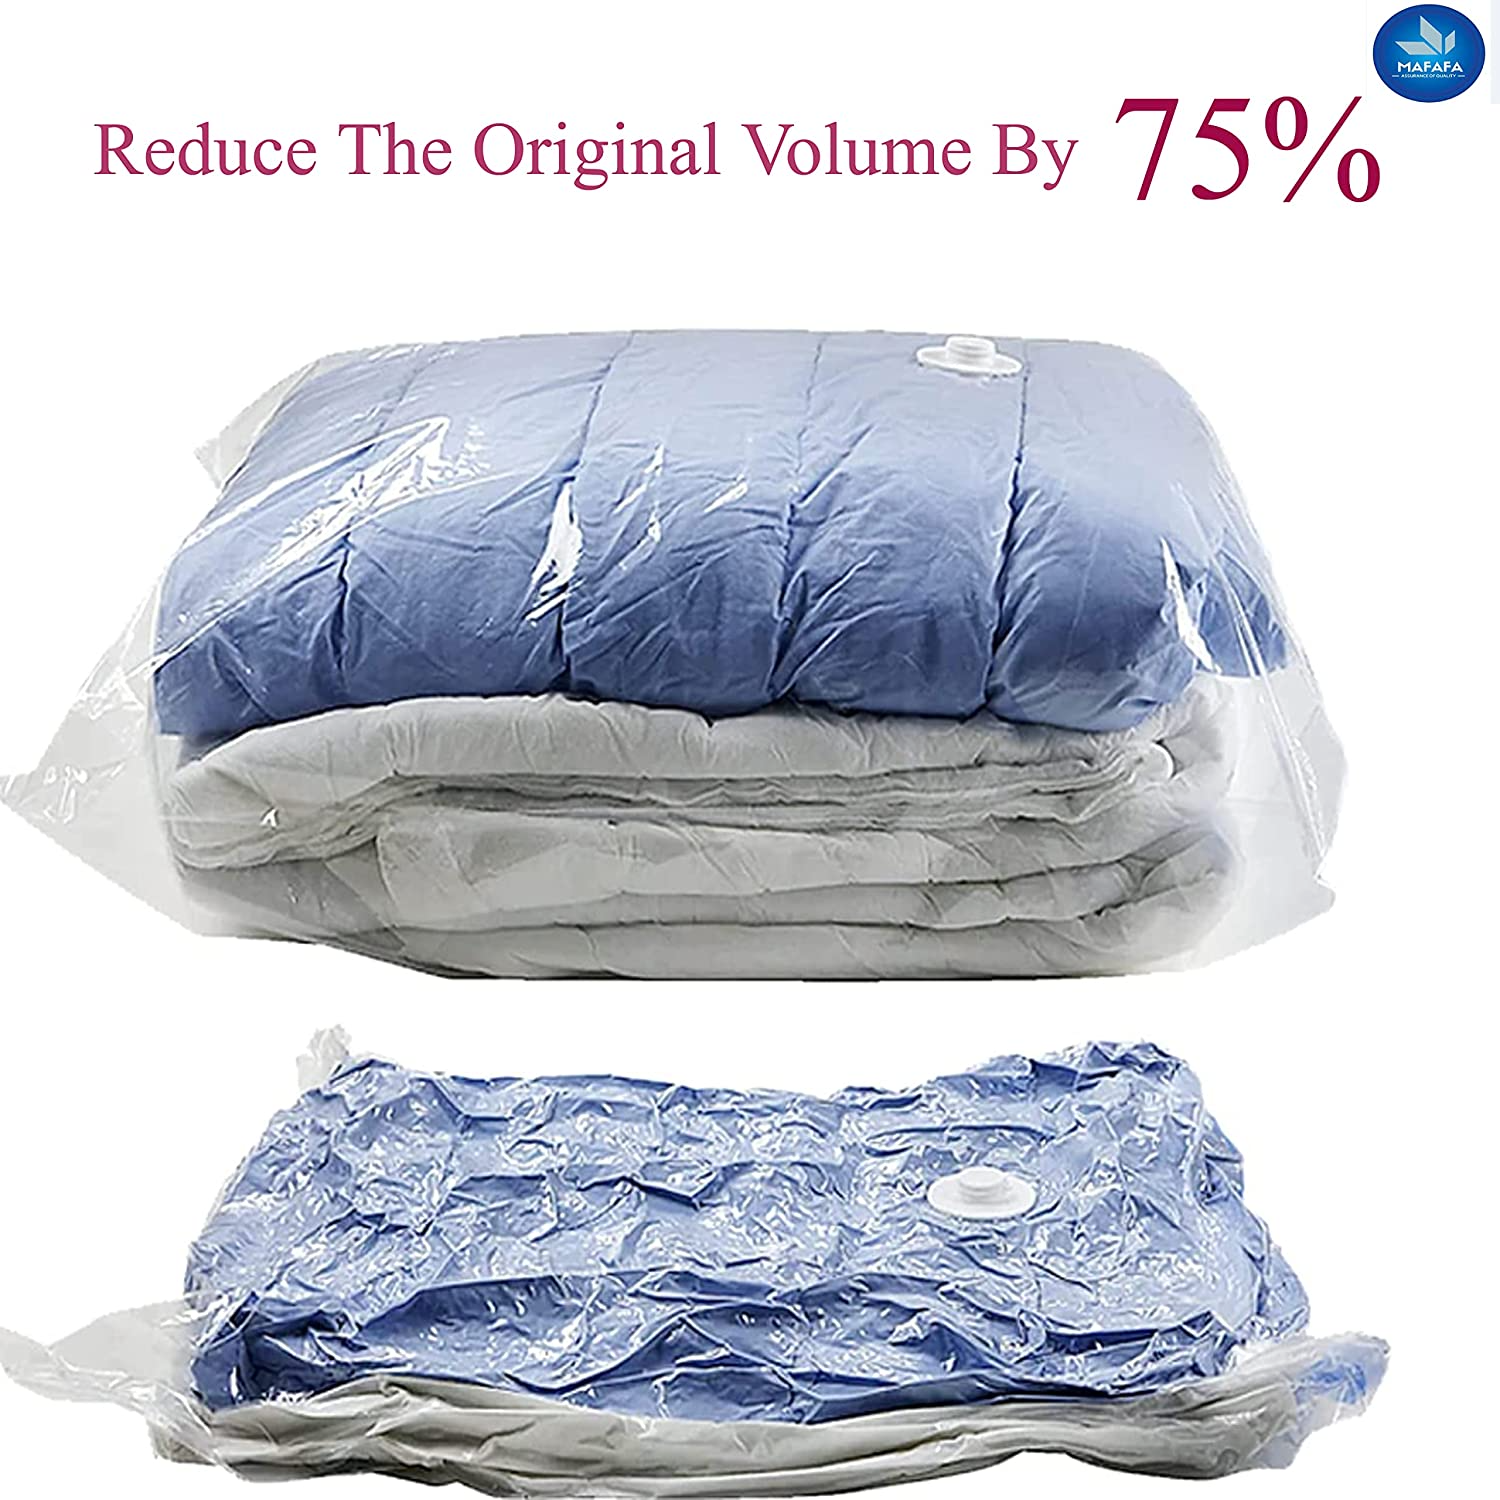 ravido Pack Of 5 Vacuum Storage Bags for Clothes Blankets Comforters  Pillows with Pump Hanging Storage Vacuum Bags Price in India  Buy ravido  Pack Of 5 Vacuum Storage Bags for Clothes